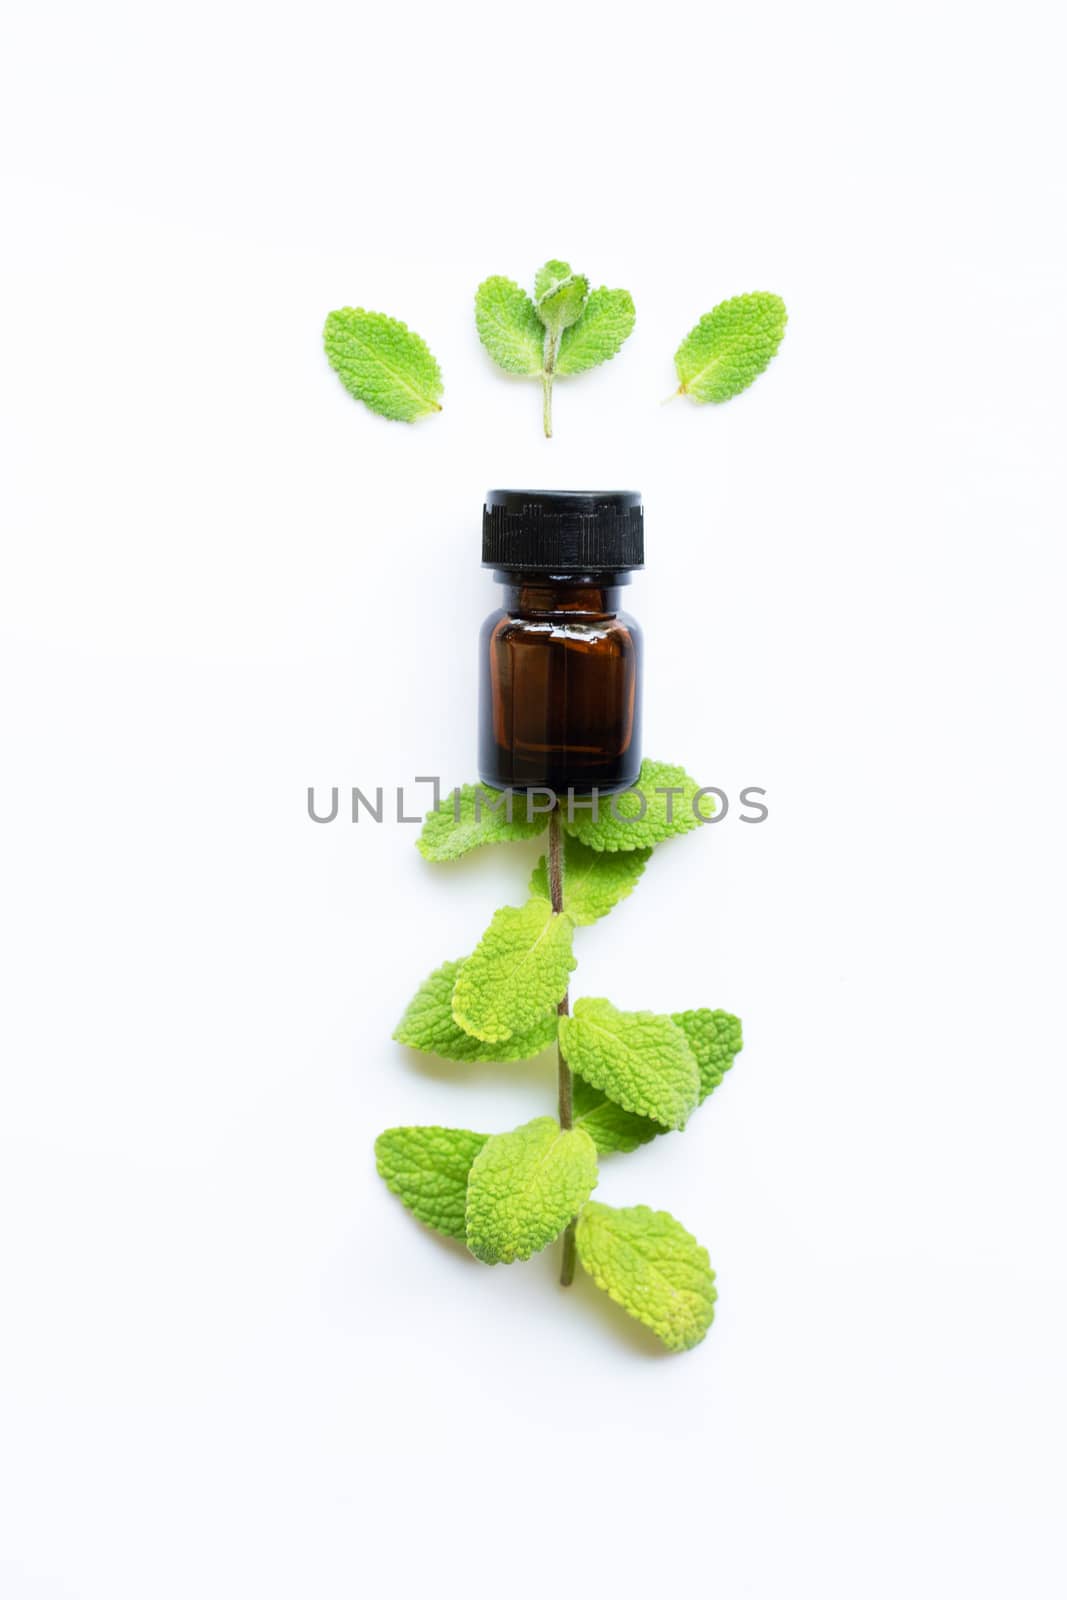 Essential oil with fresh mint leaves on white background. by Bowonpat